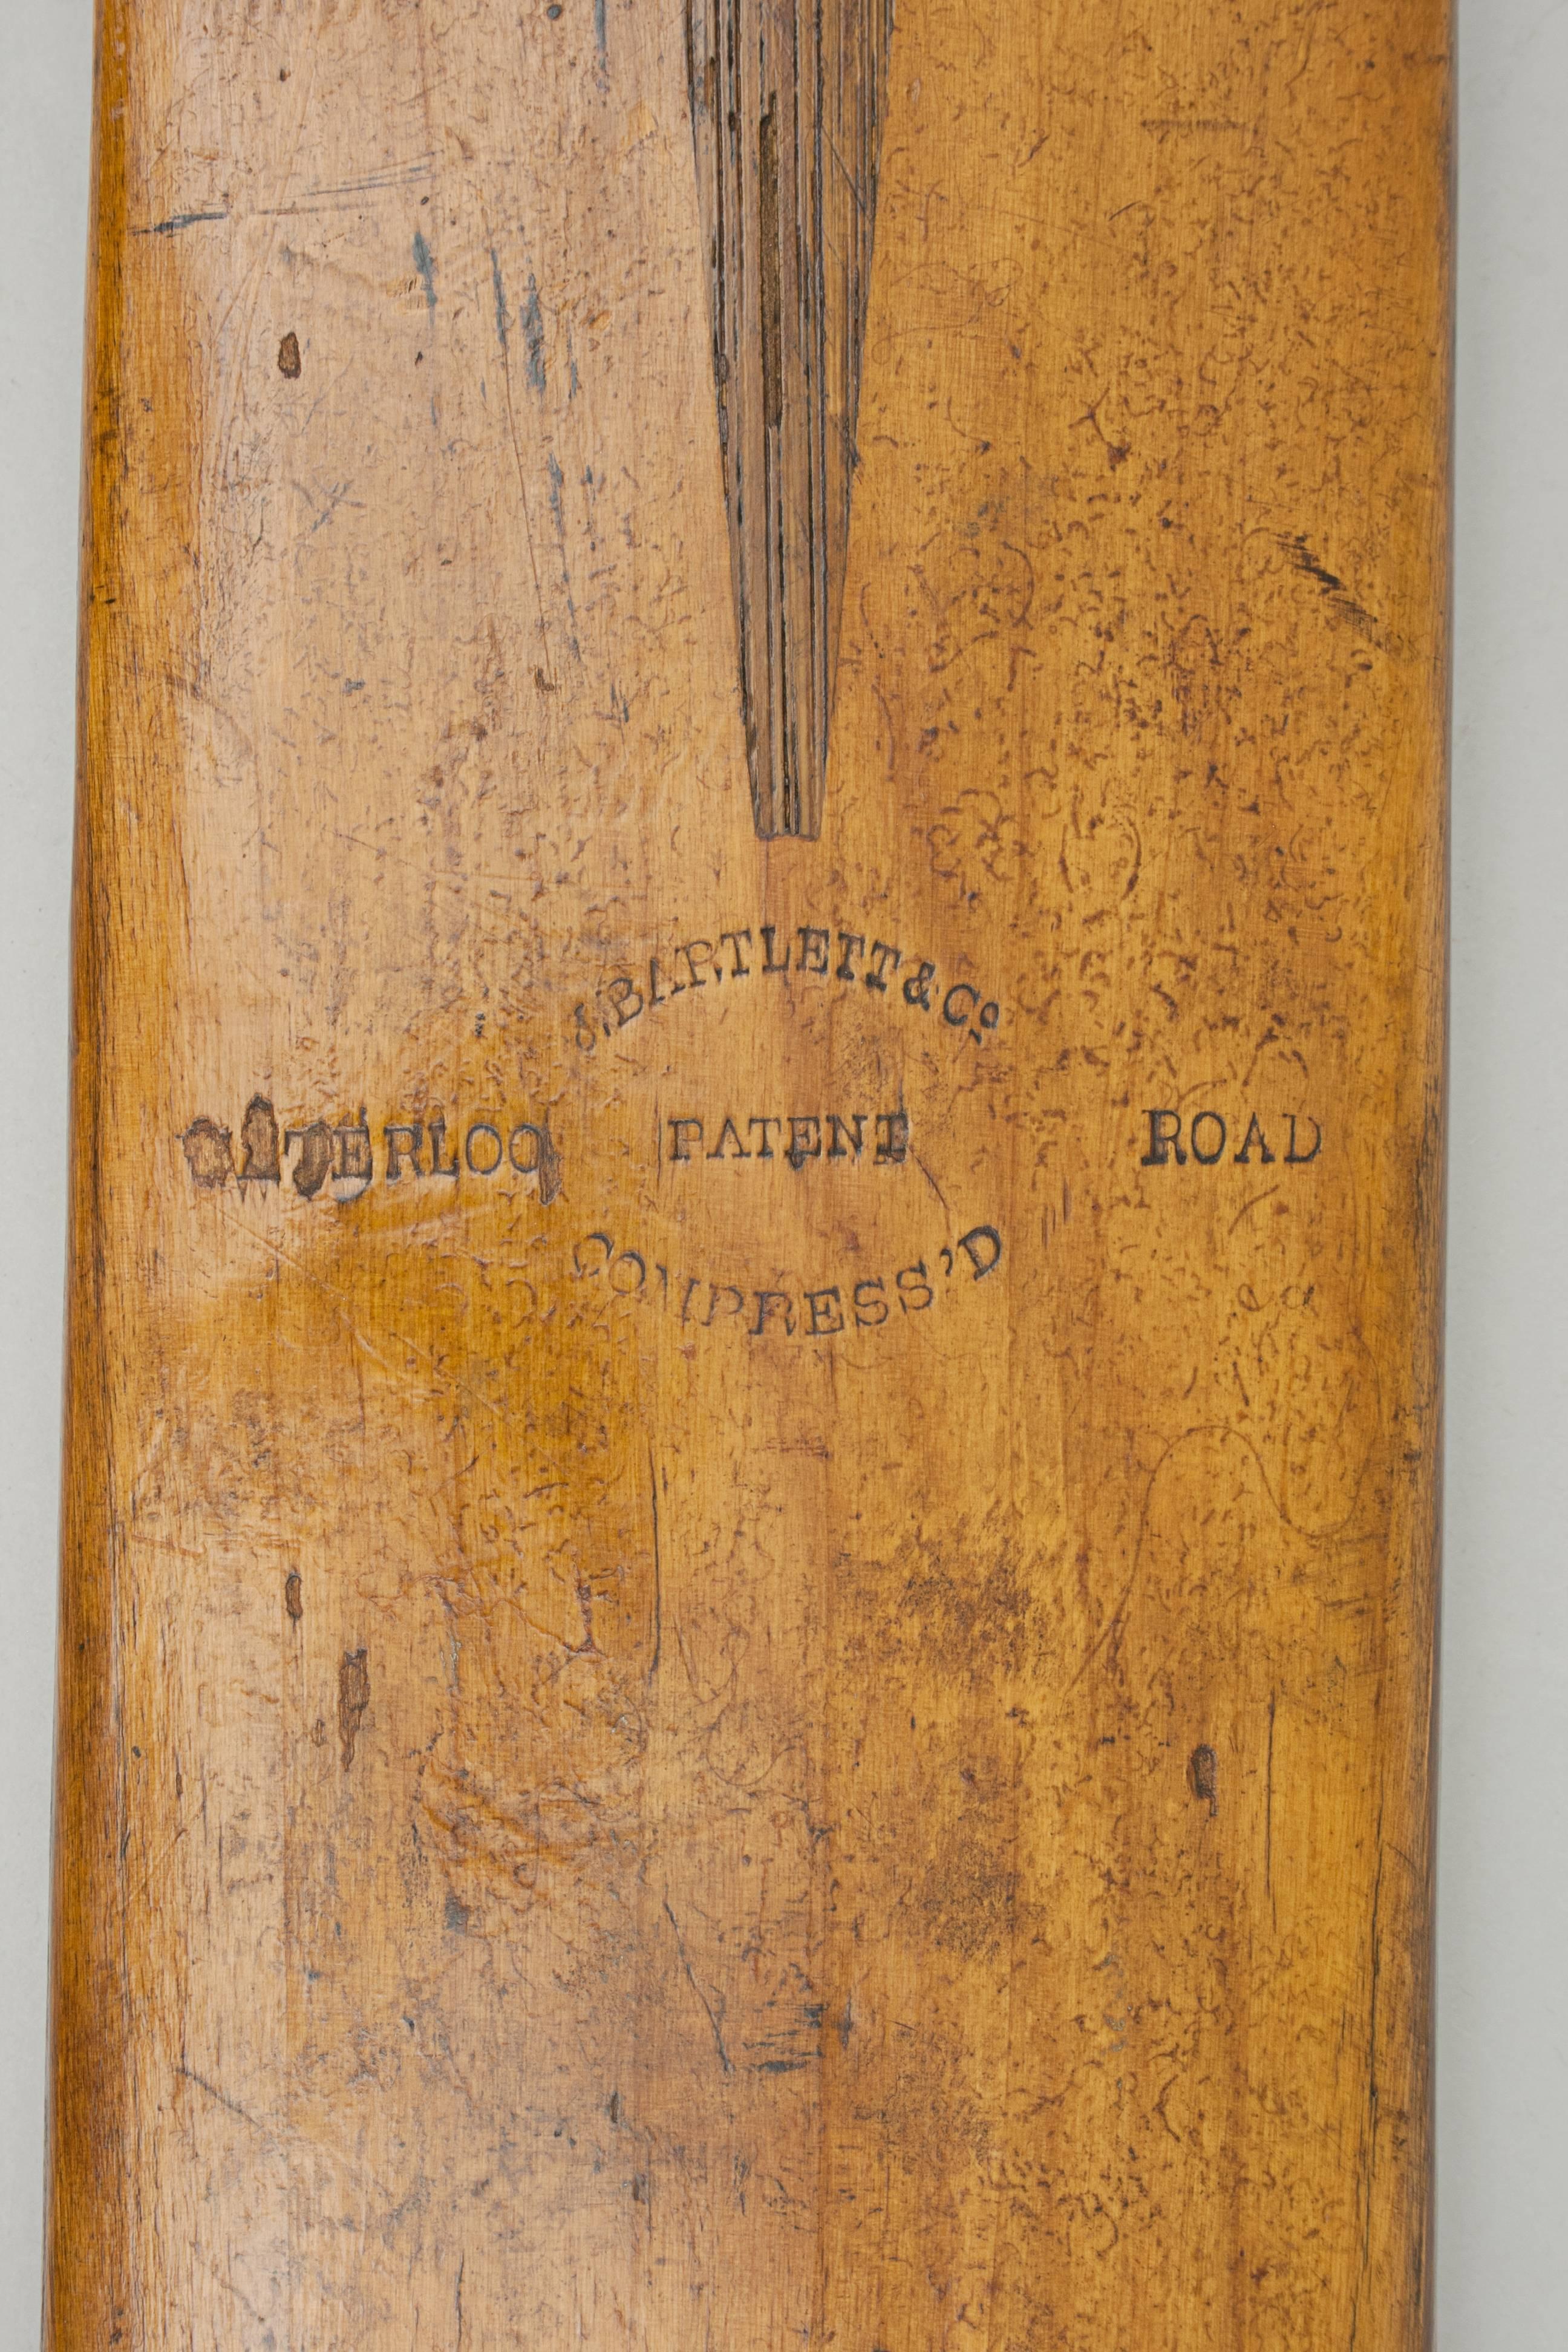 Victorian J. Bartlett & Co. Cricket Bat.
A good early willow cricket bat made by J. Bartlett & Co., Waterloo Road, London. The bat has a rounded back, cord strung handle, round shoulders and very attractive patination. The blade stamped 'J.Bartlett